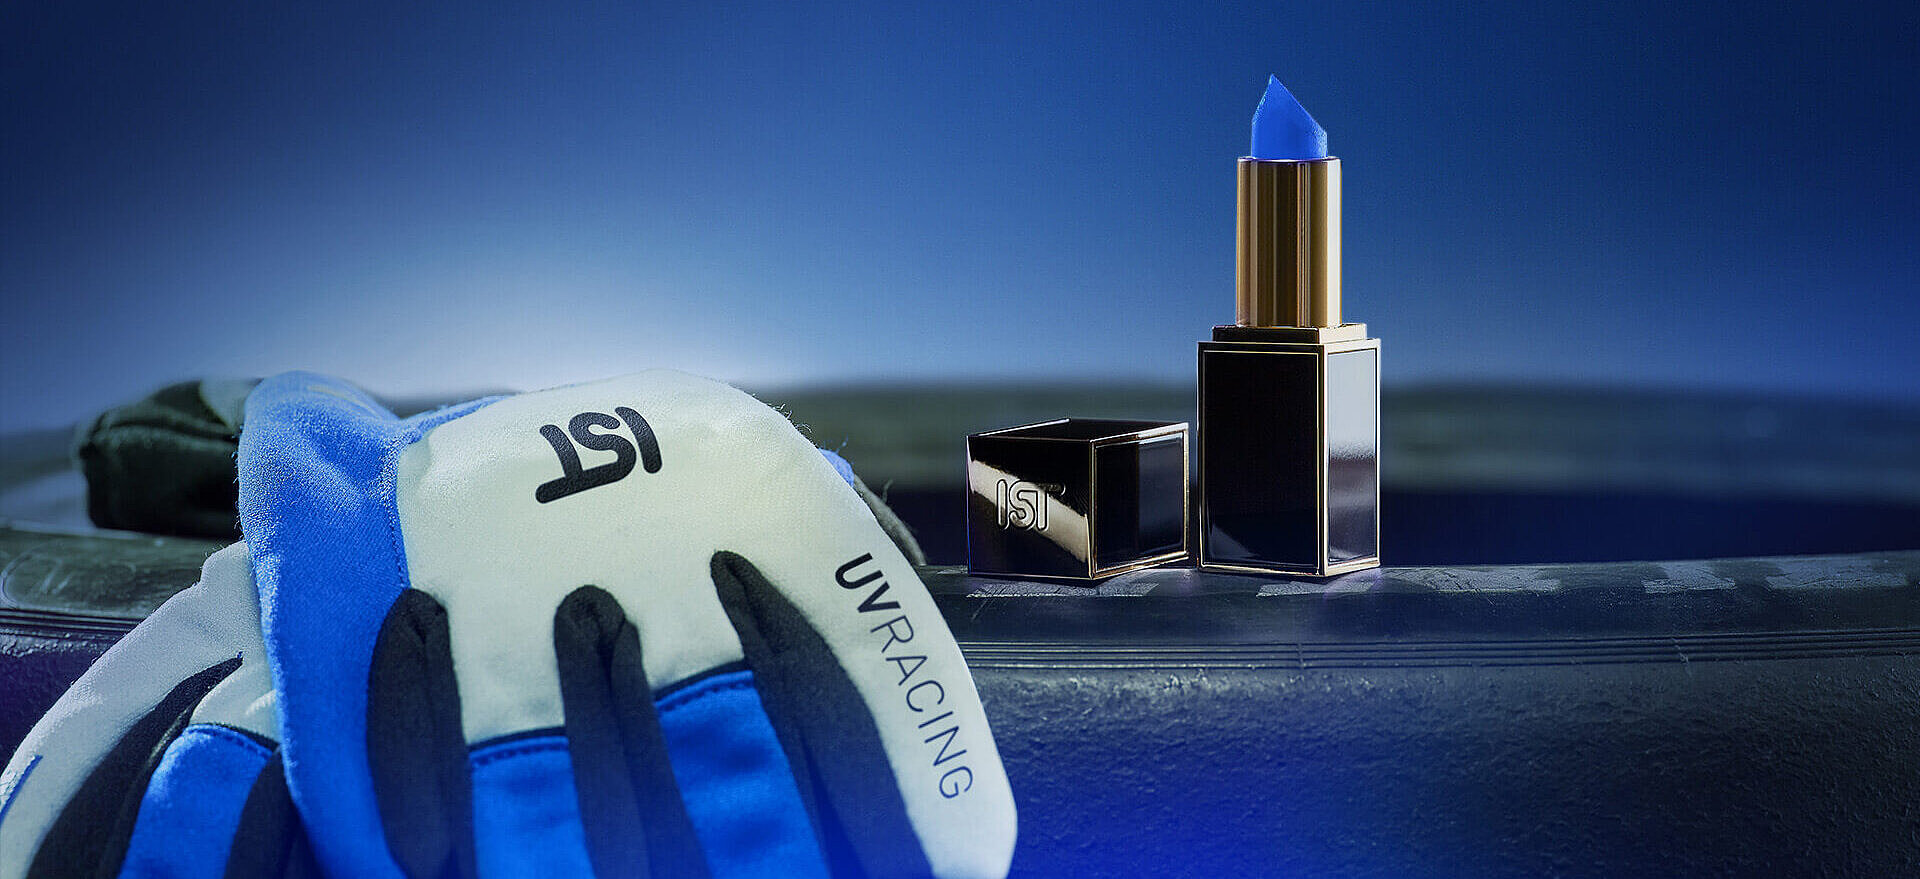 UV systems for surface finishing of cosmetic parts